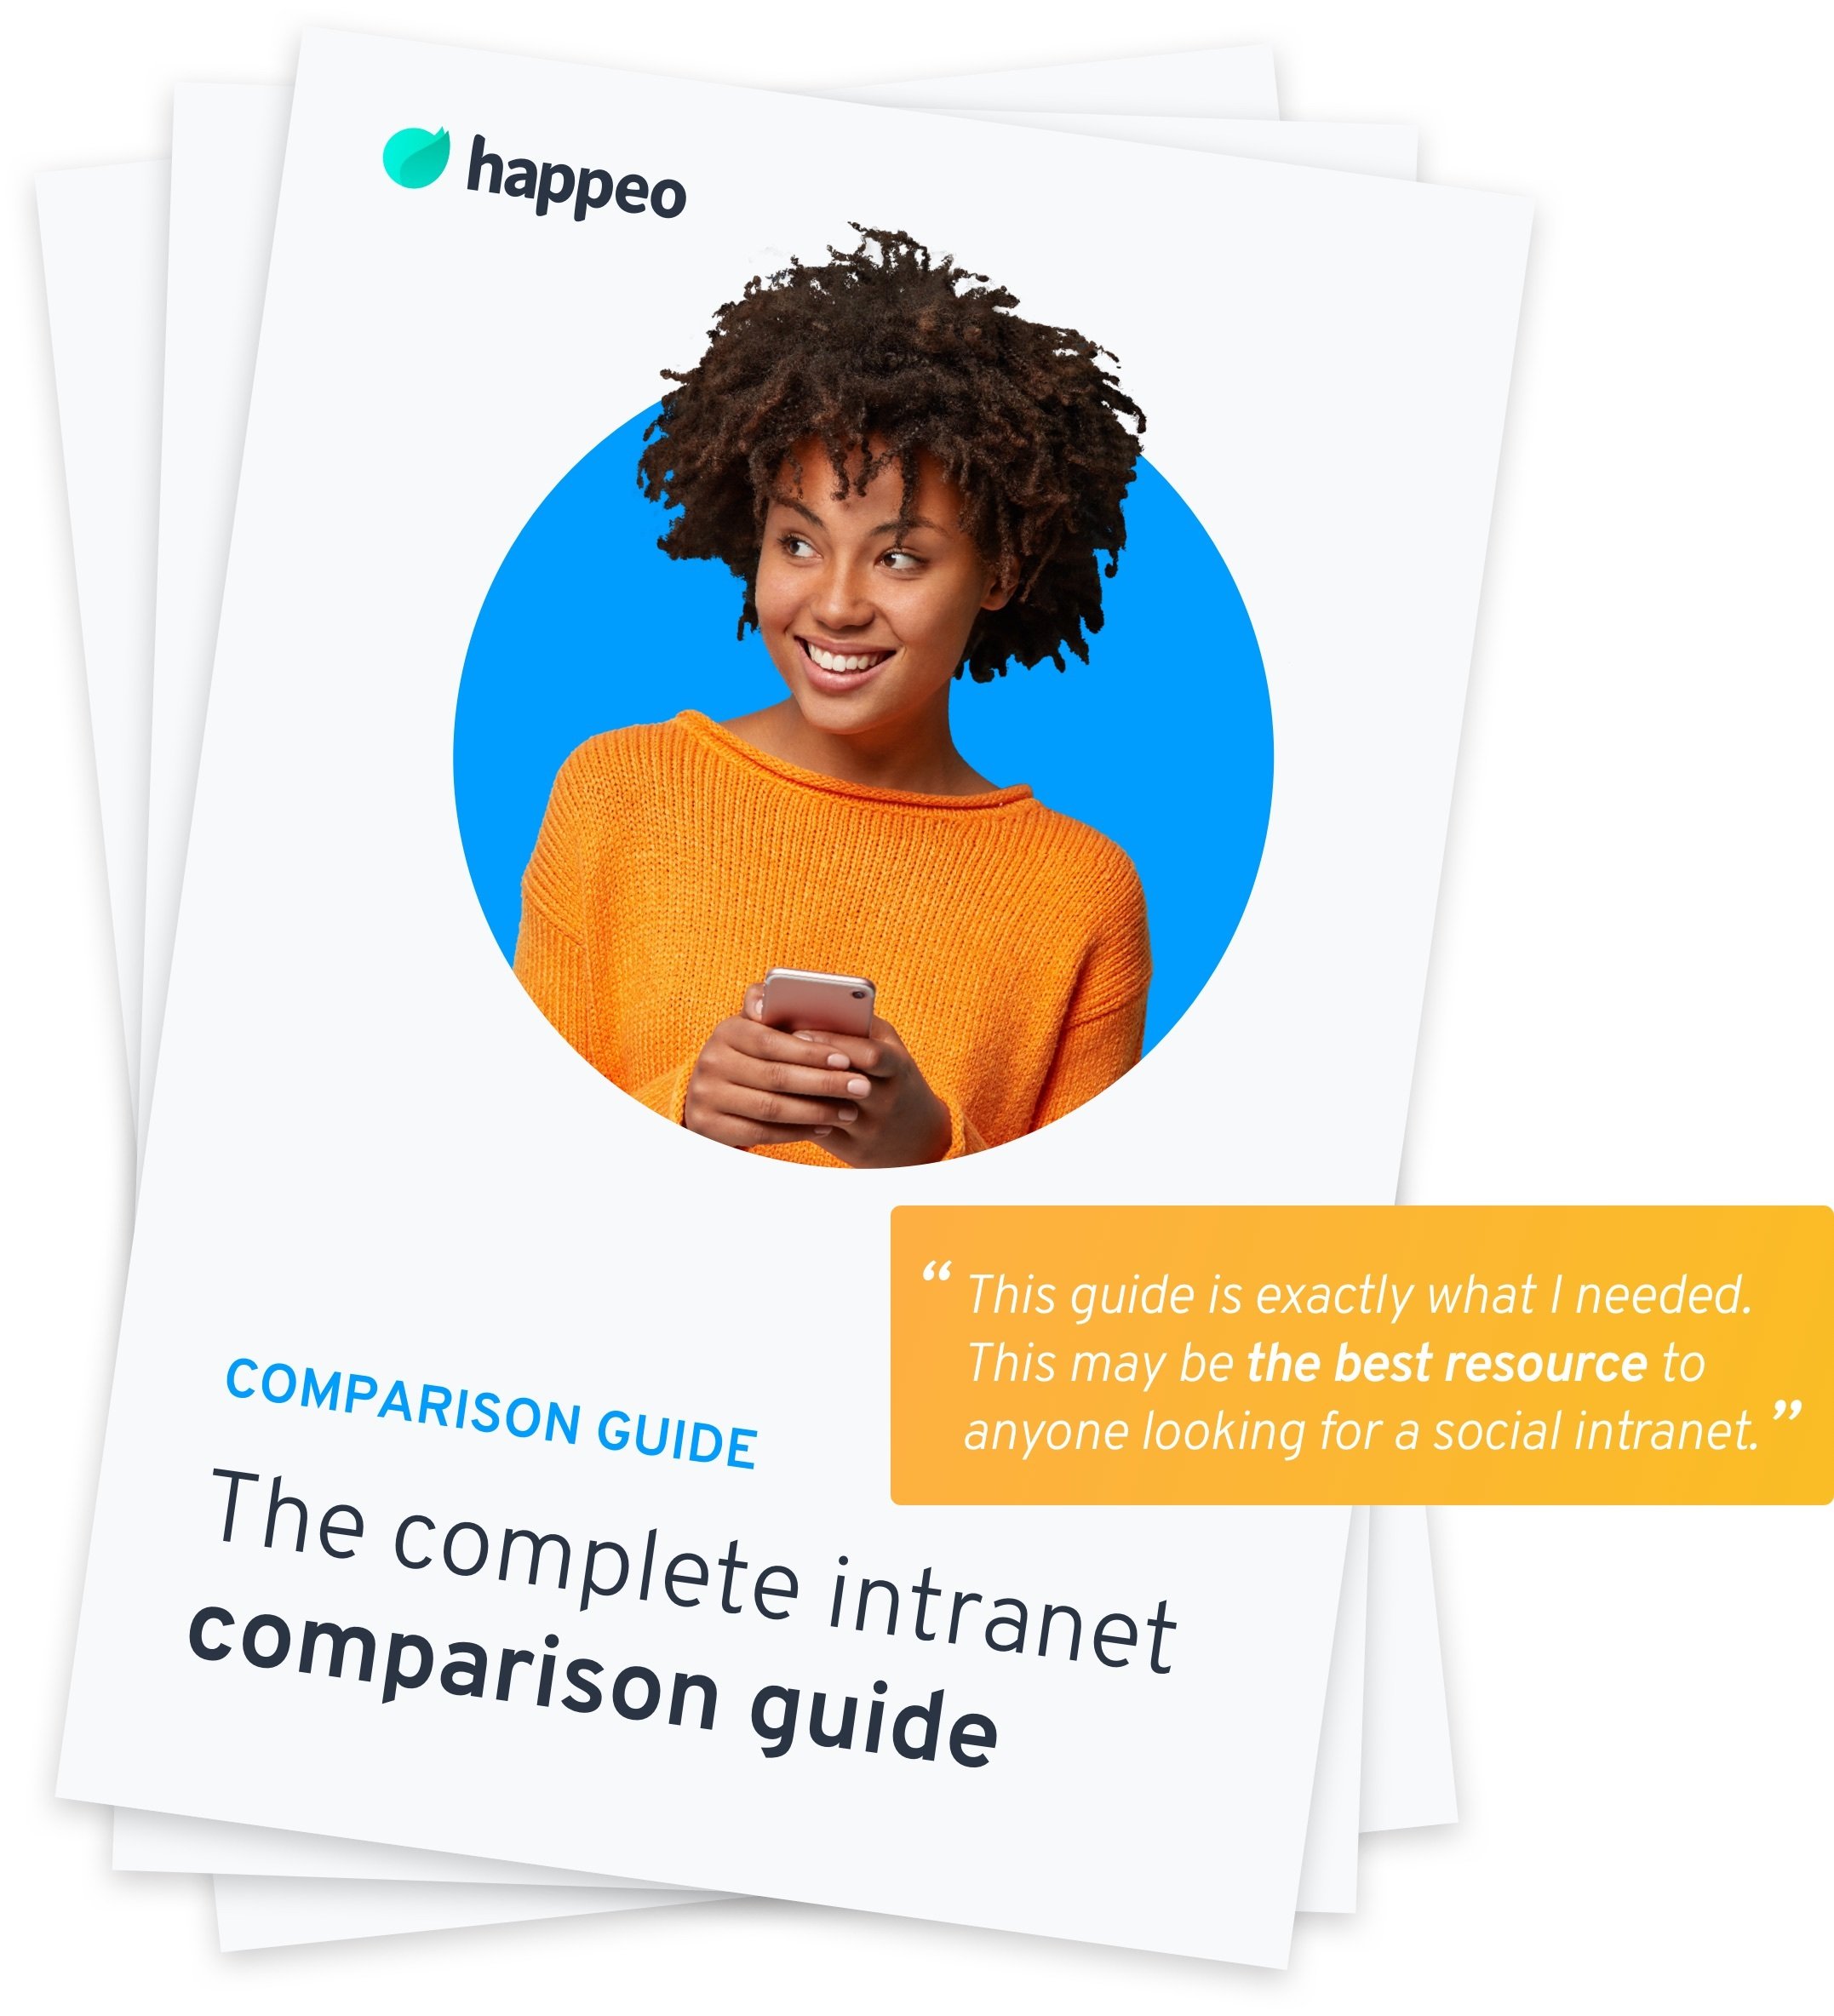 Happeo Security features